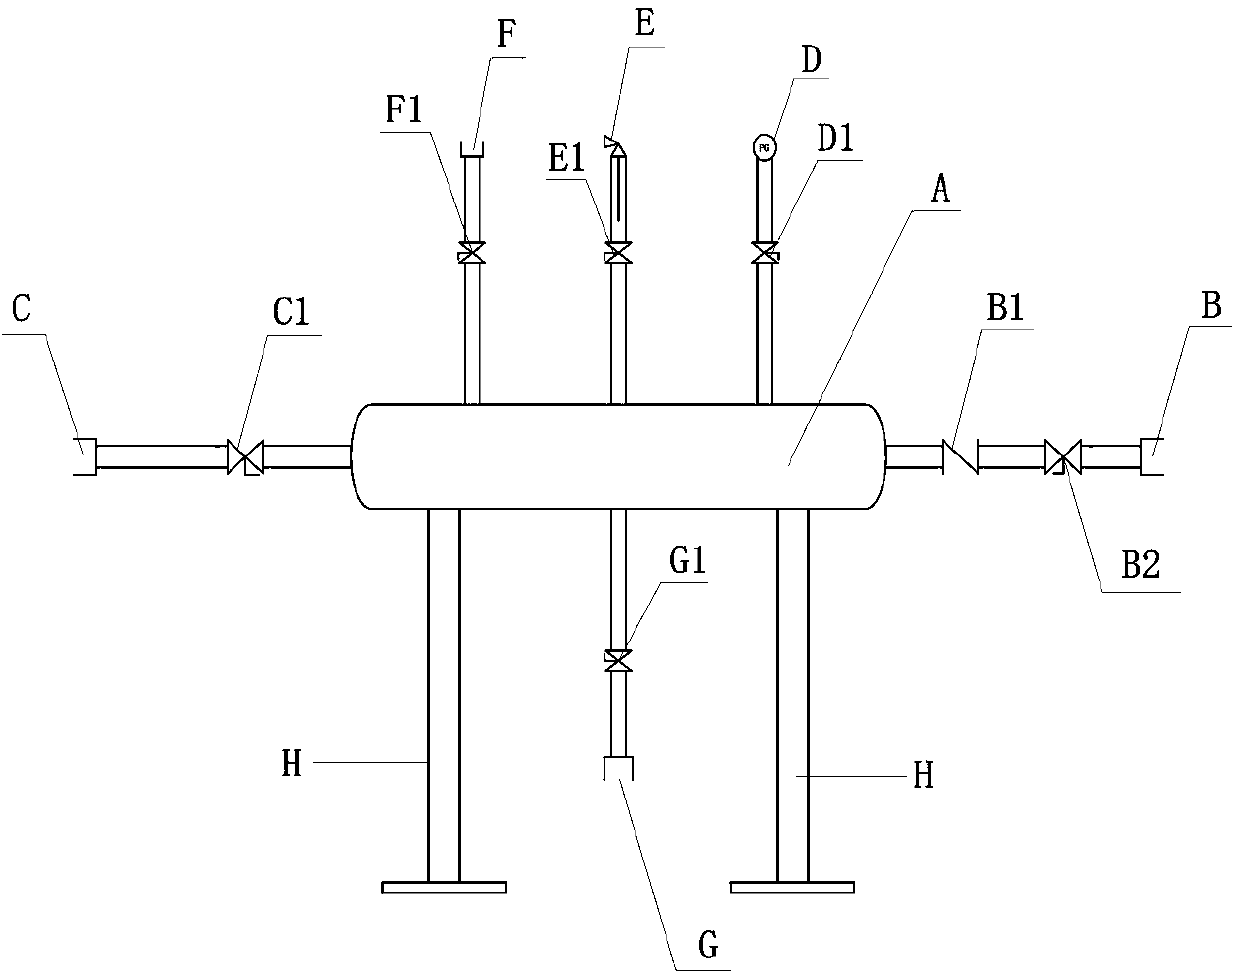 Construction method of steel-jacketed steel steam direct burial pipeline